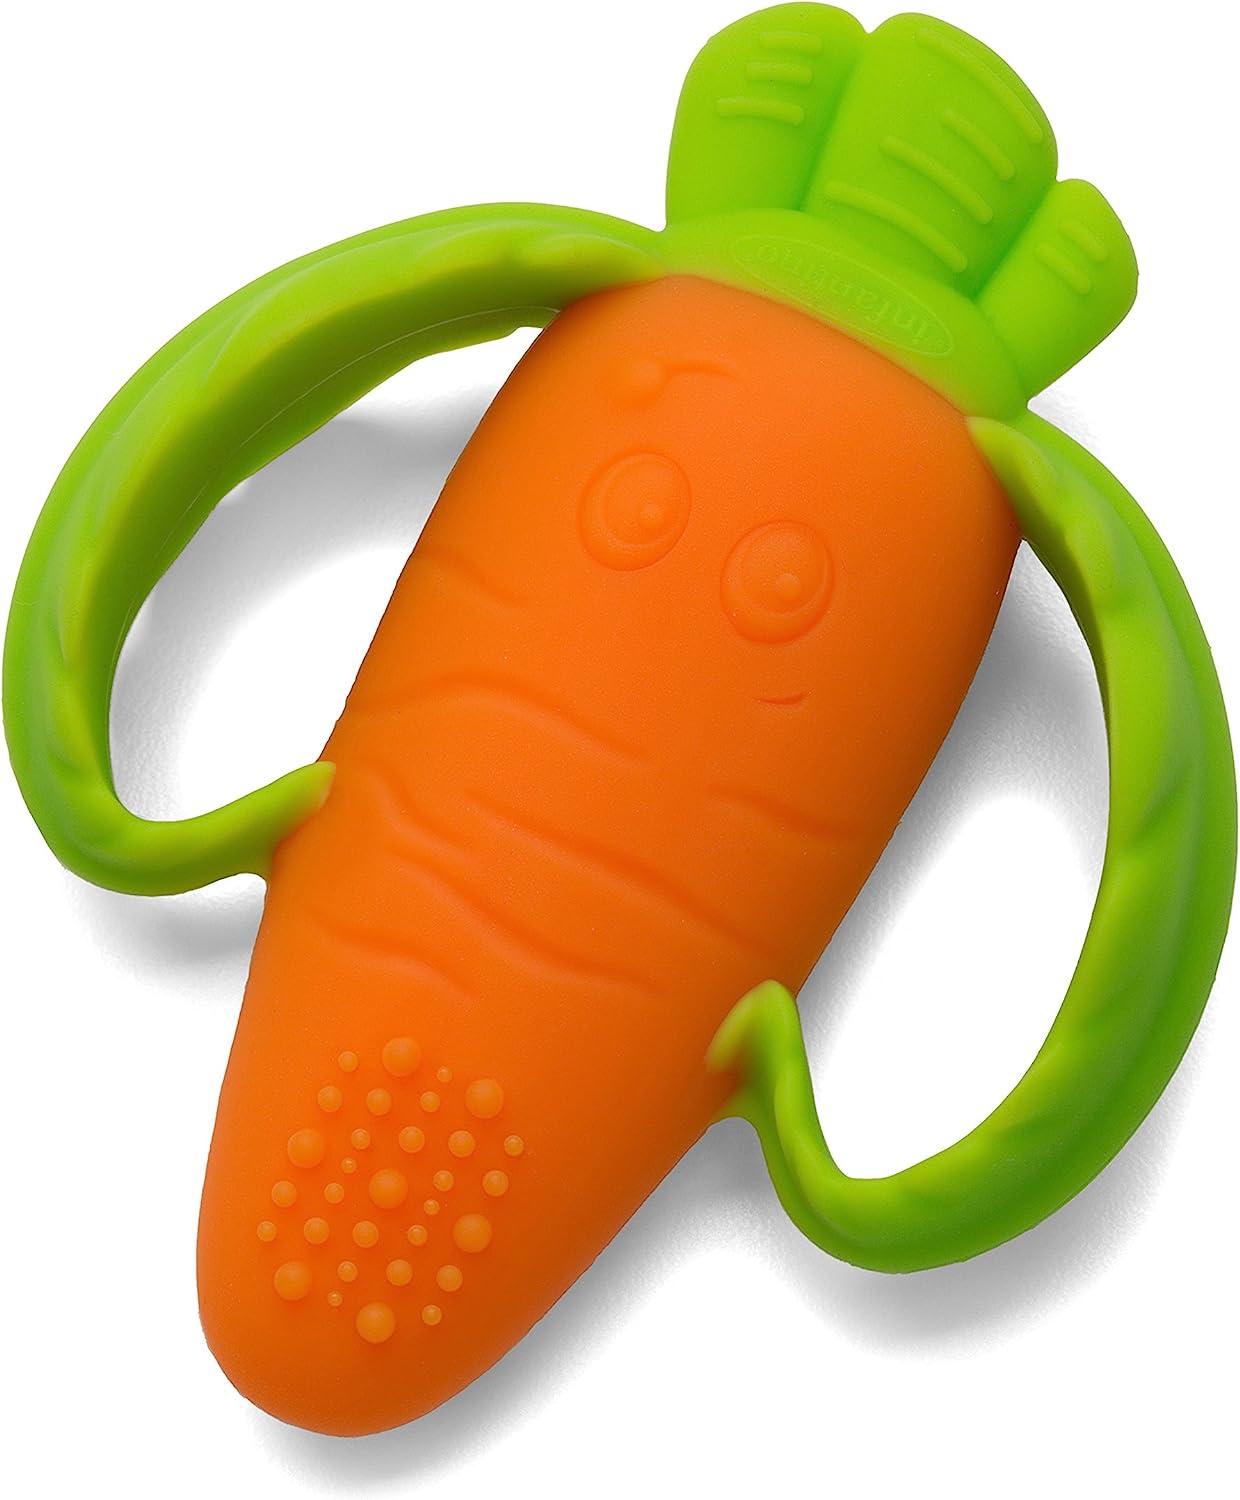 SHOWAY Textured Silicone Carrot Teether Baby Sensory Teether Toy for Infants Teething Toys for Newborns BPA Free Infant and Toddler Silicone Teethers